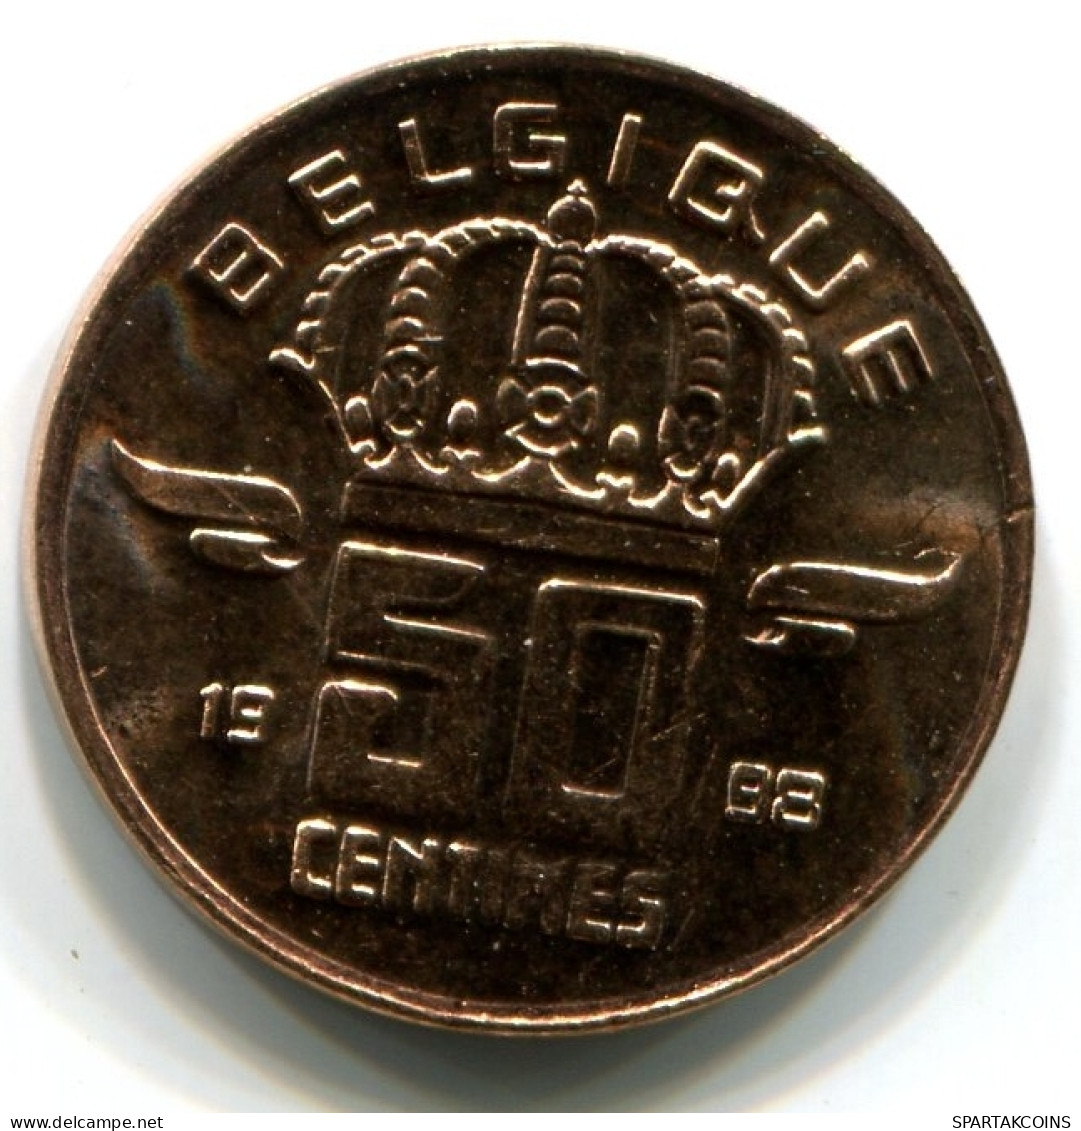 50 CENTIMES 1998 FRENCH Text BELGIUM Coin UNC #W11430.U - 50 Cents